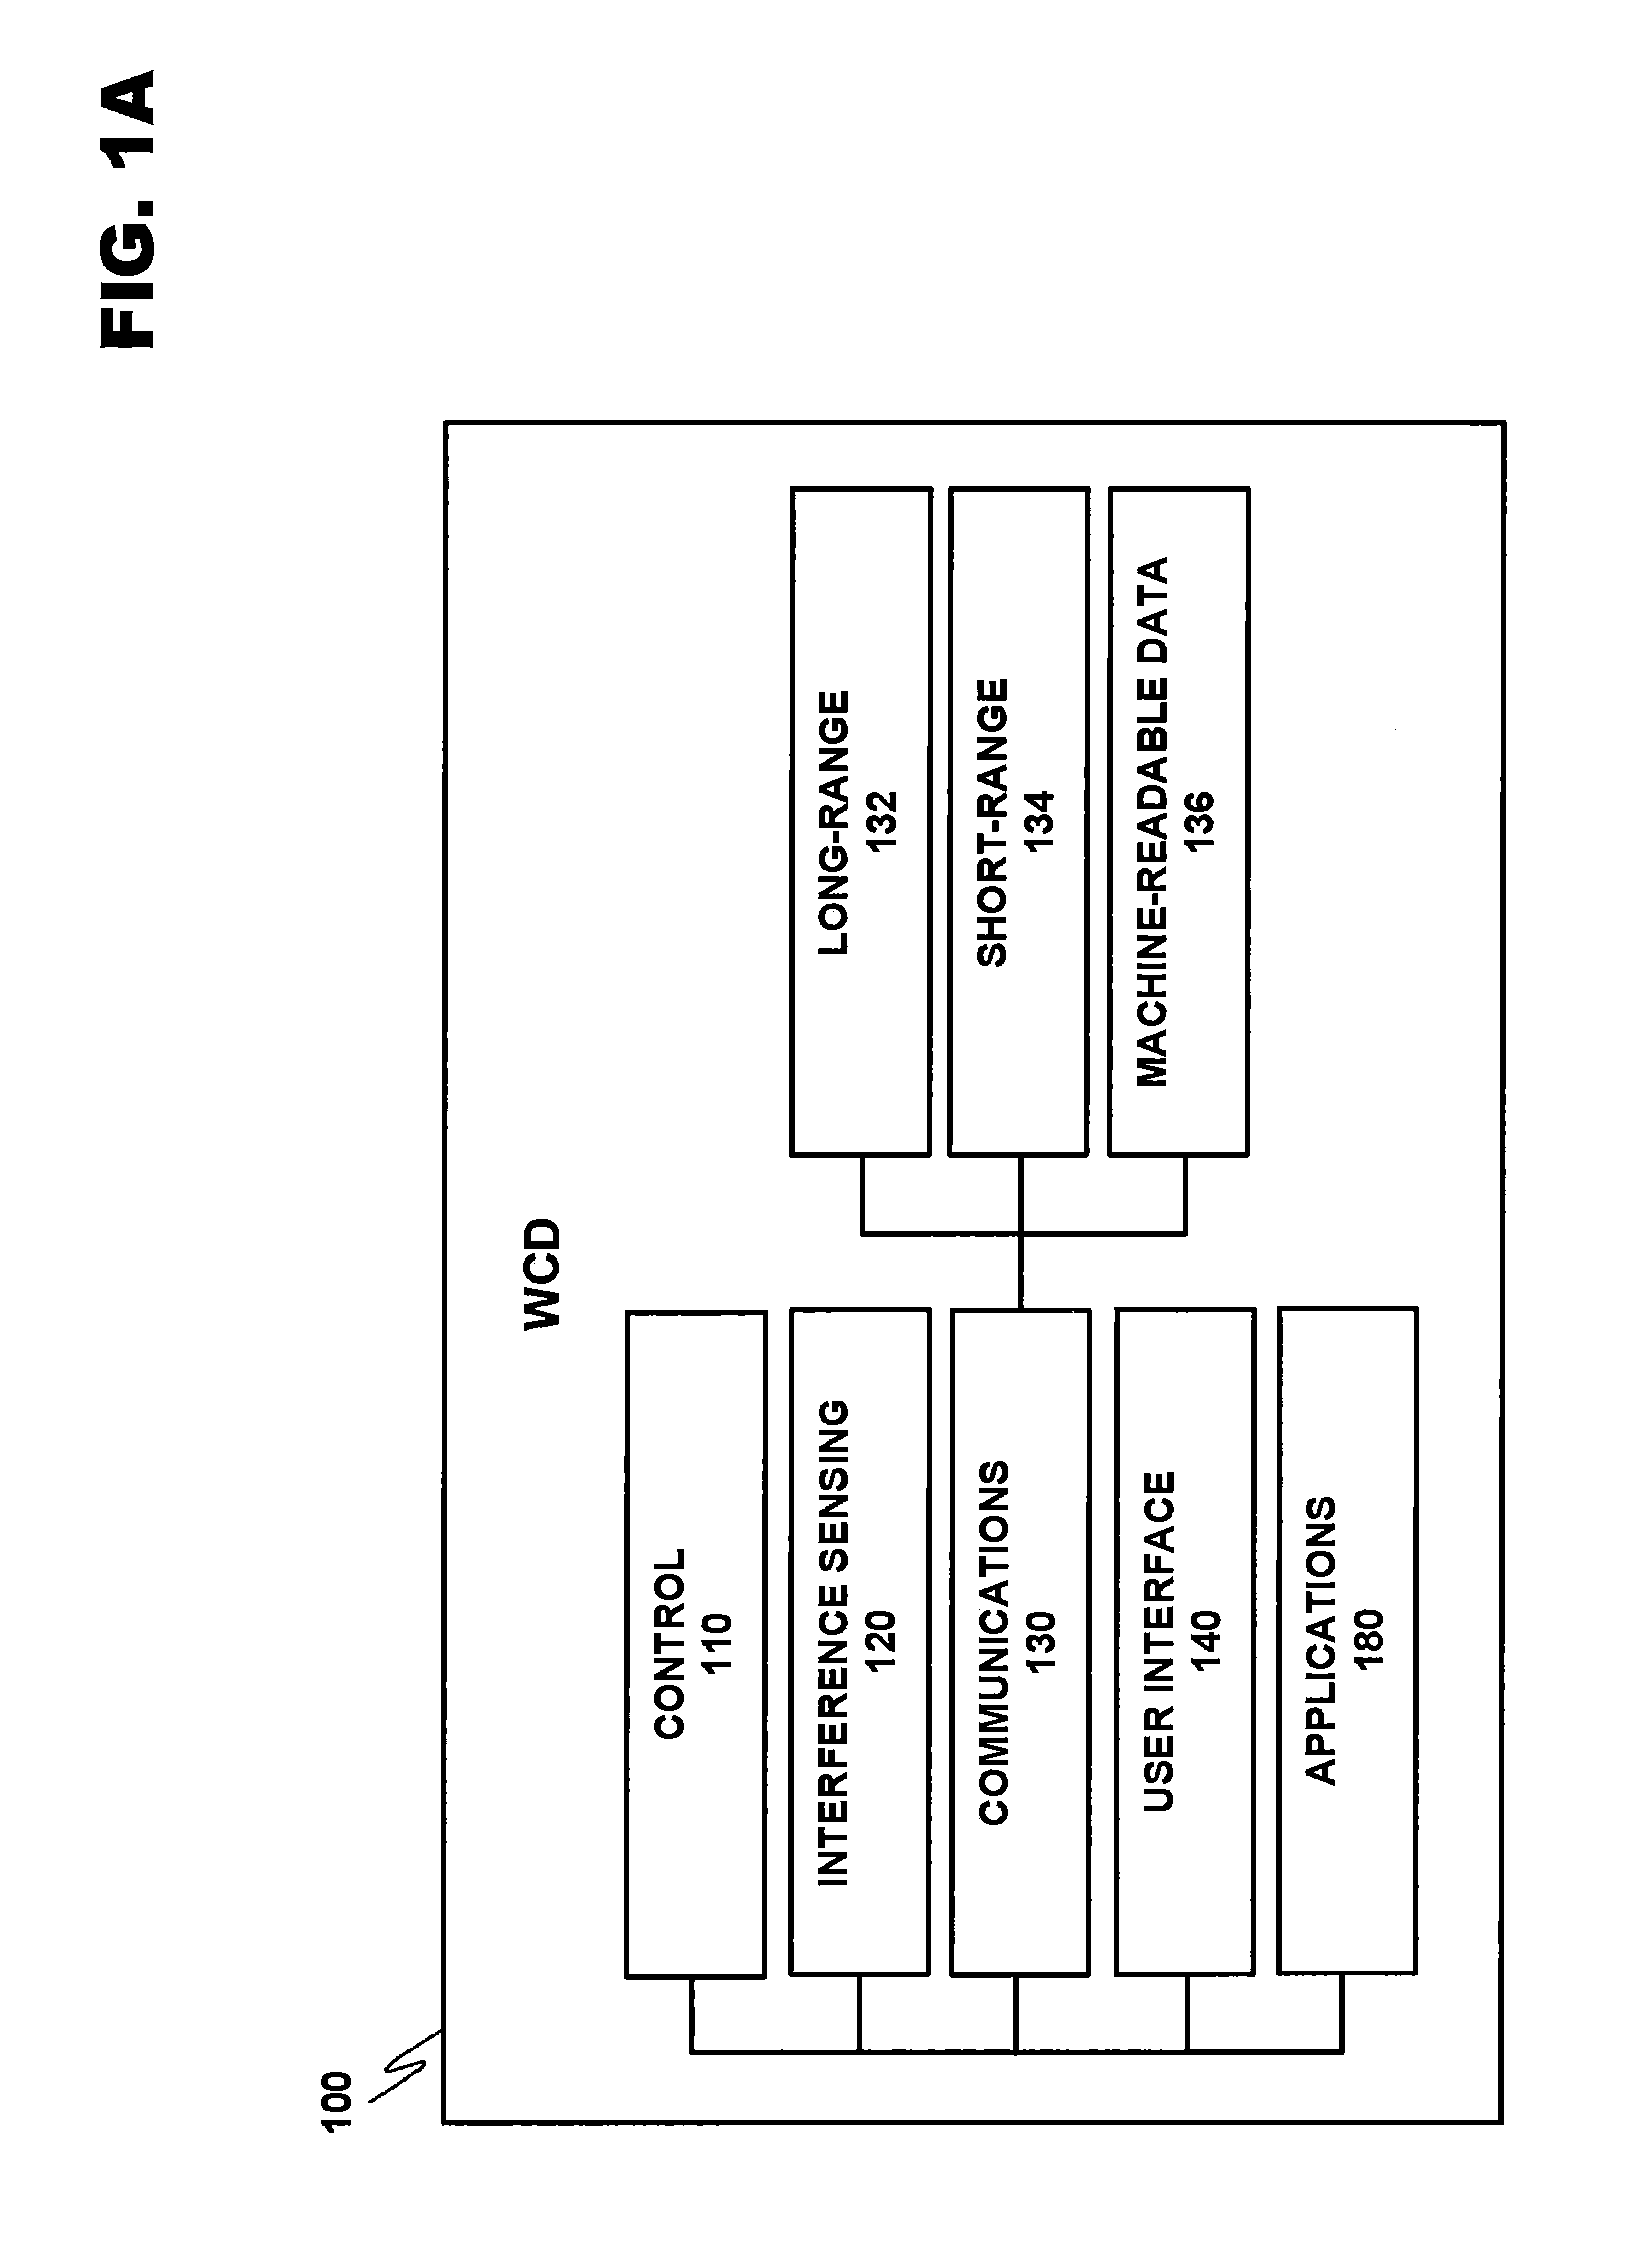 Connectionless information transfer from advertising device